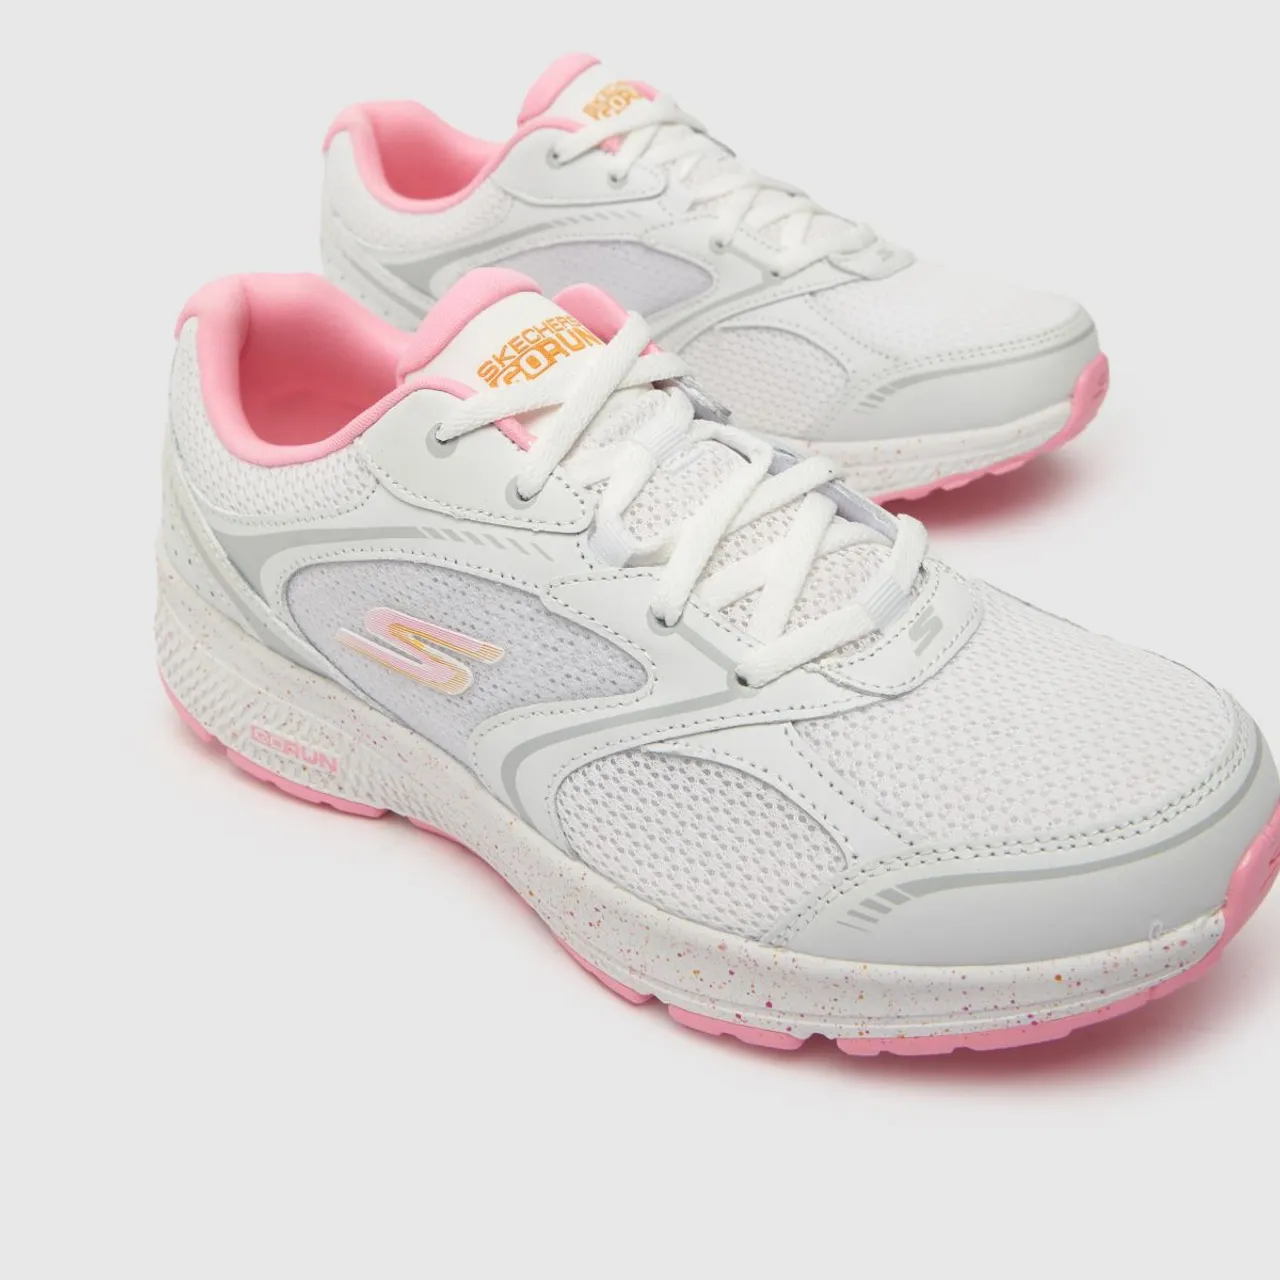 Skechers Go Run Consistent Runner Trainers In White & Pink